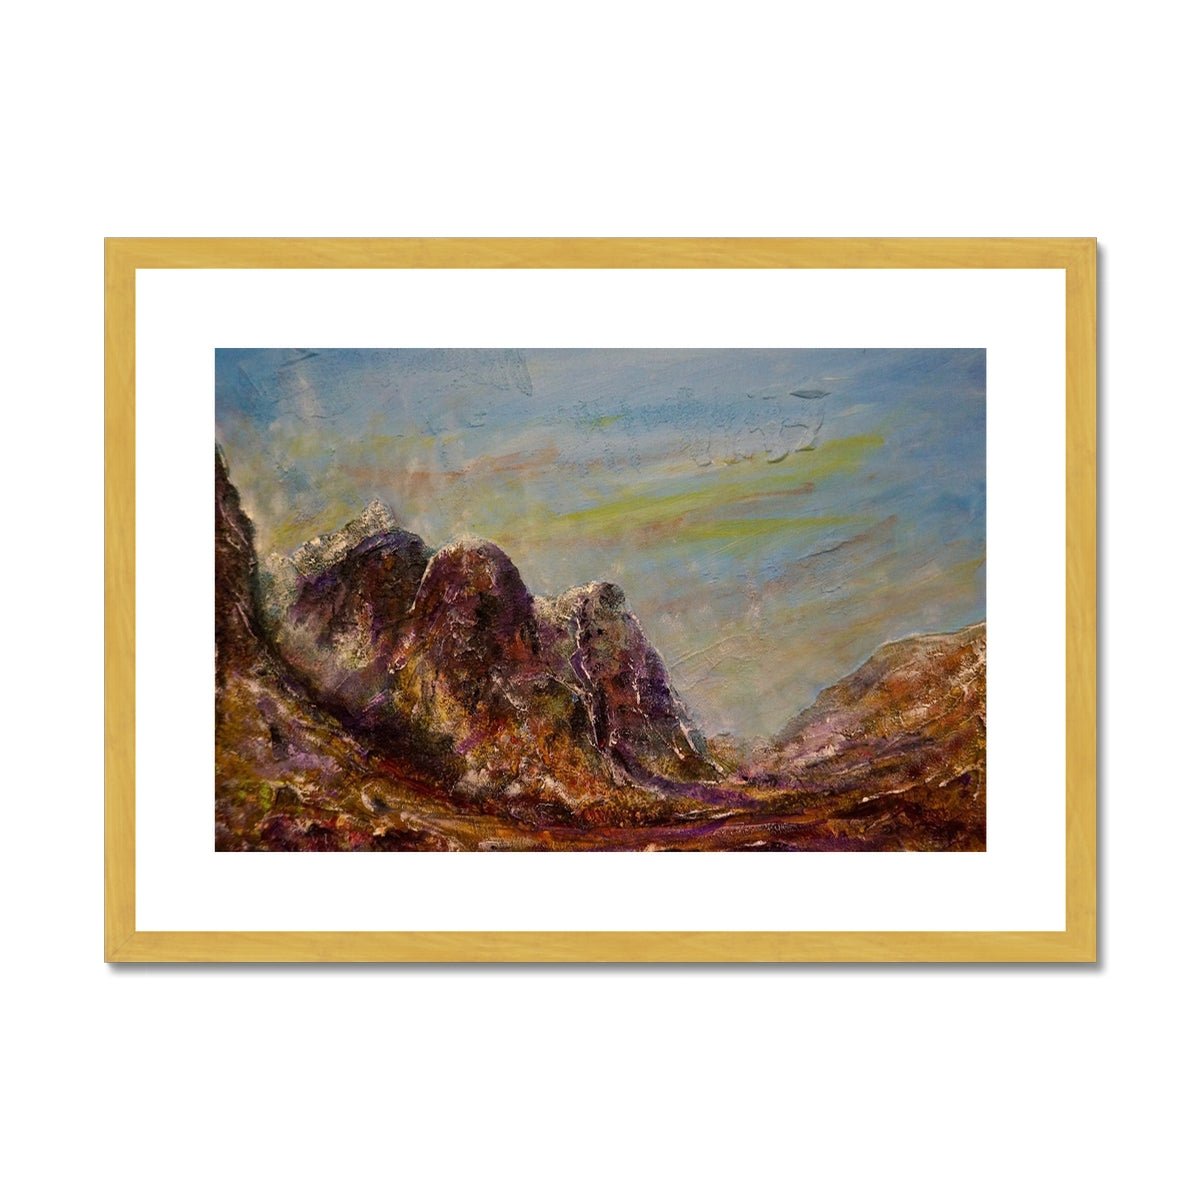 Three Sisters Glencoe Painting | Antique Framed & Mounted Prints From Scotland-Antique Framed & Mounted Prints-Glencoe Art Gallery-A2 Landscape-Gold Frame-Paintings, Prints, Homeware, Art Gifts From Scotland By Scottish Artist Kevin Hunter